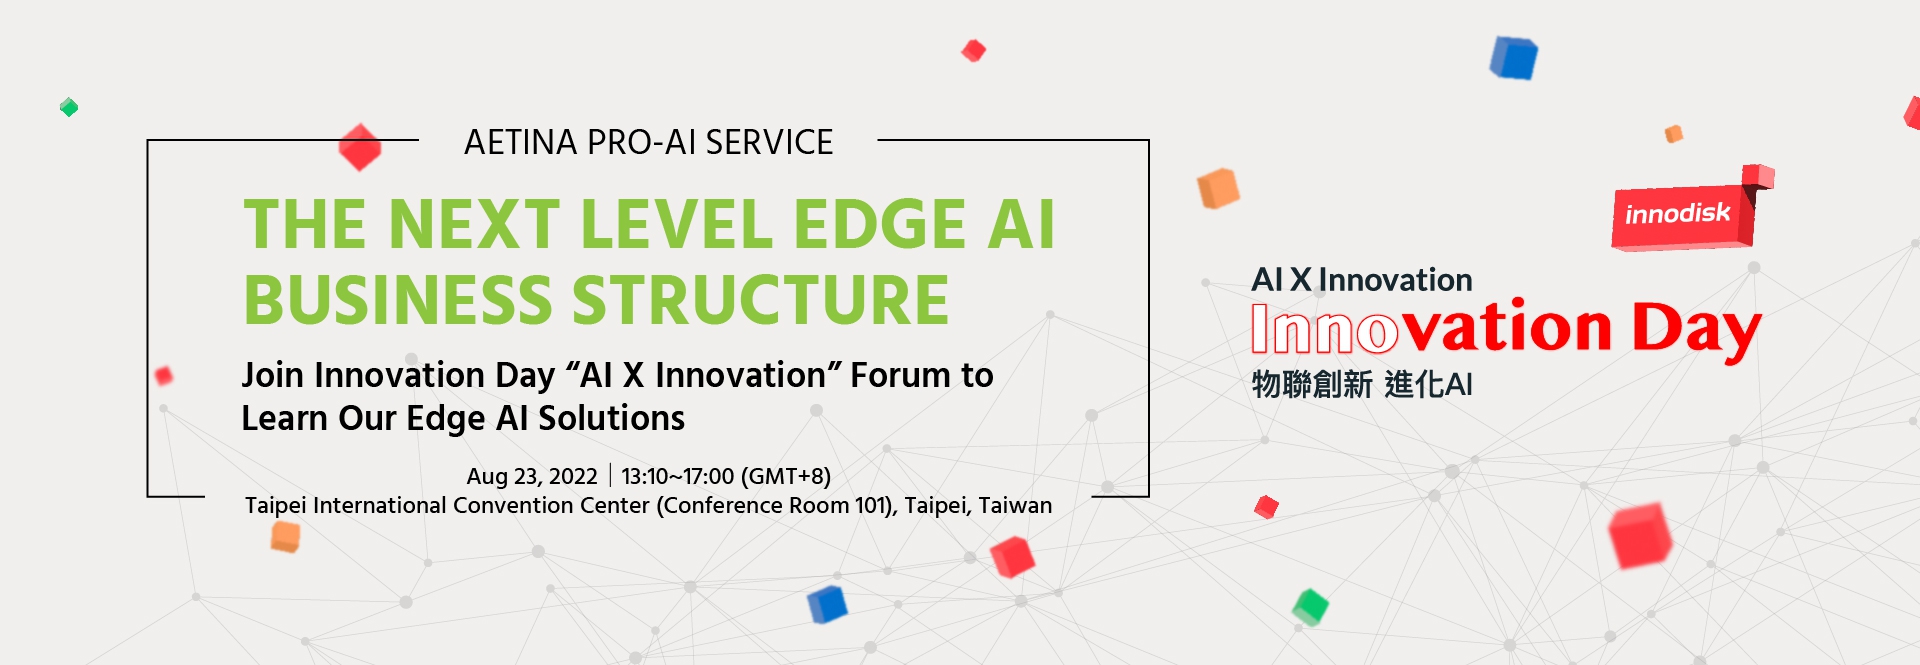 Join Innovation Day “AI X Innovation” Forum to Learn Our Edge AI Solutions